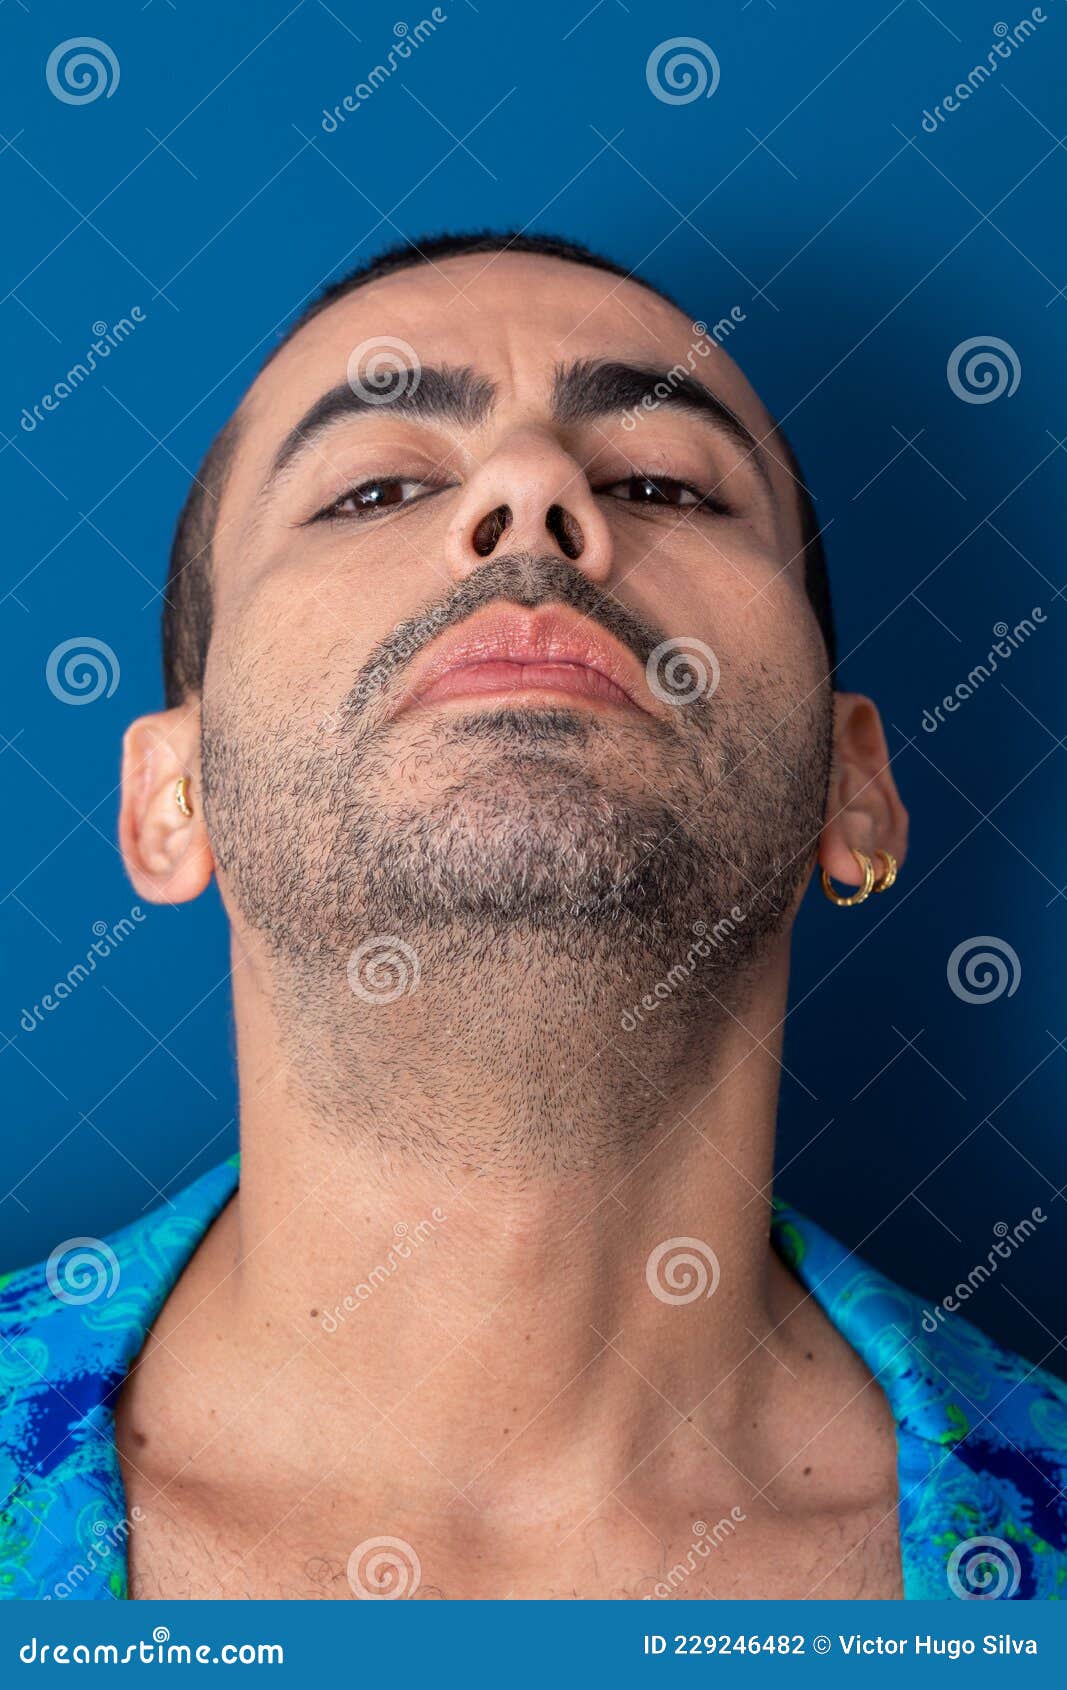 gay man with colorful nails, rainbow colors, freedom, no prejudice, beautiful nails, blue and green clothes on a blue background.